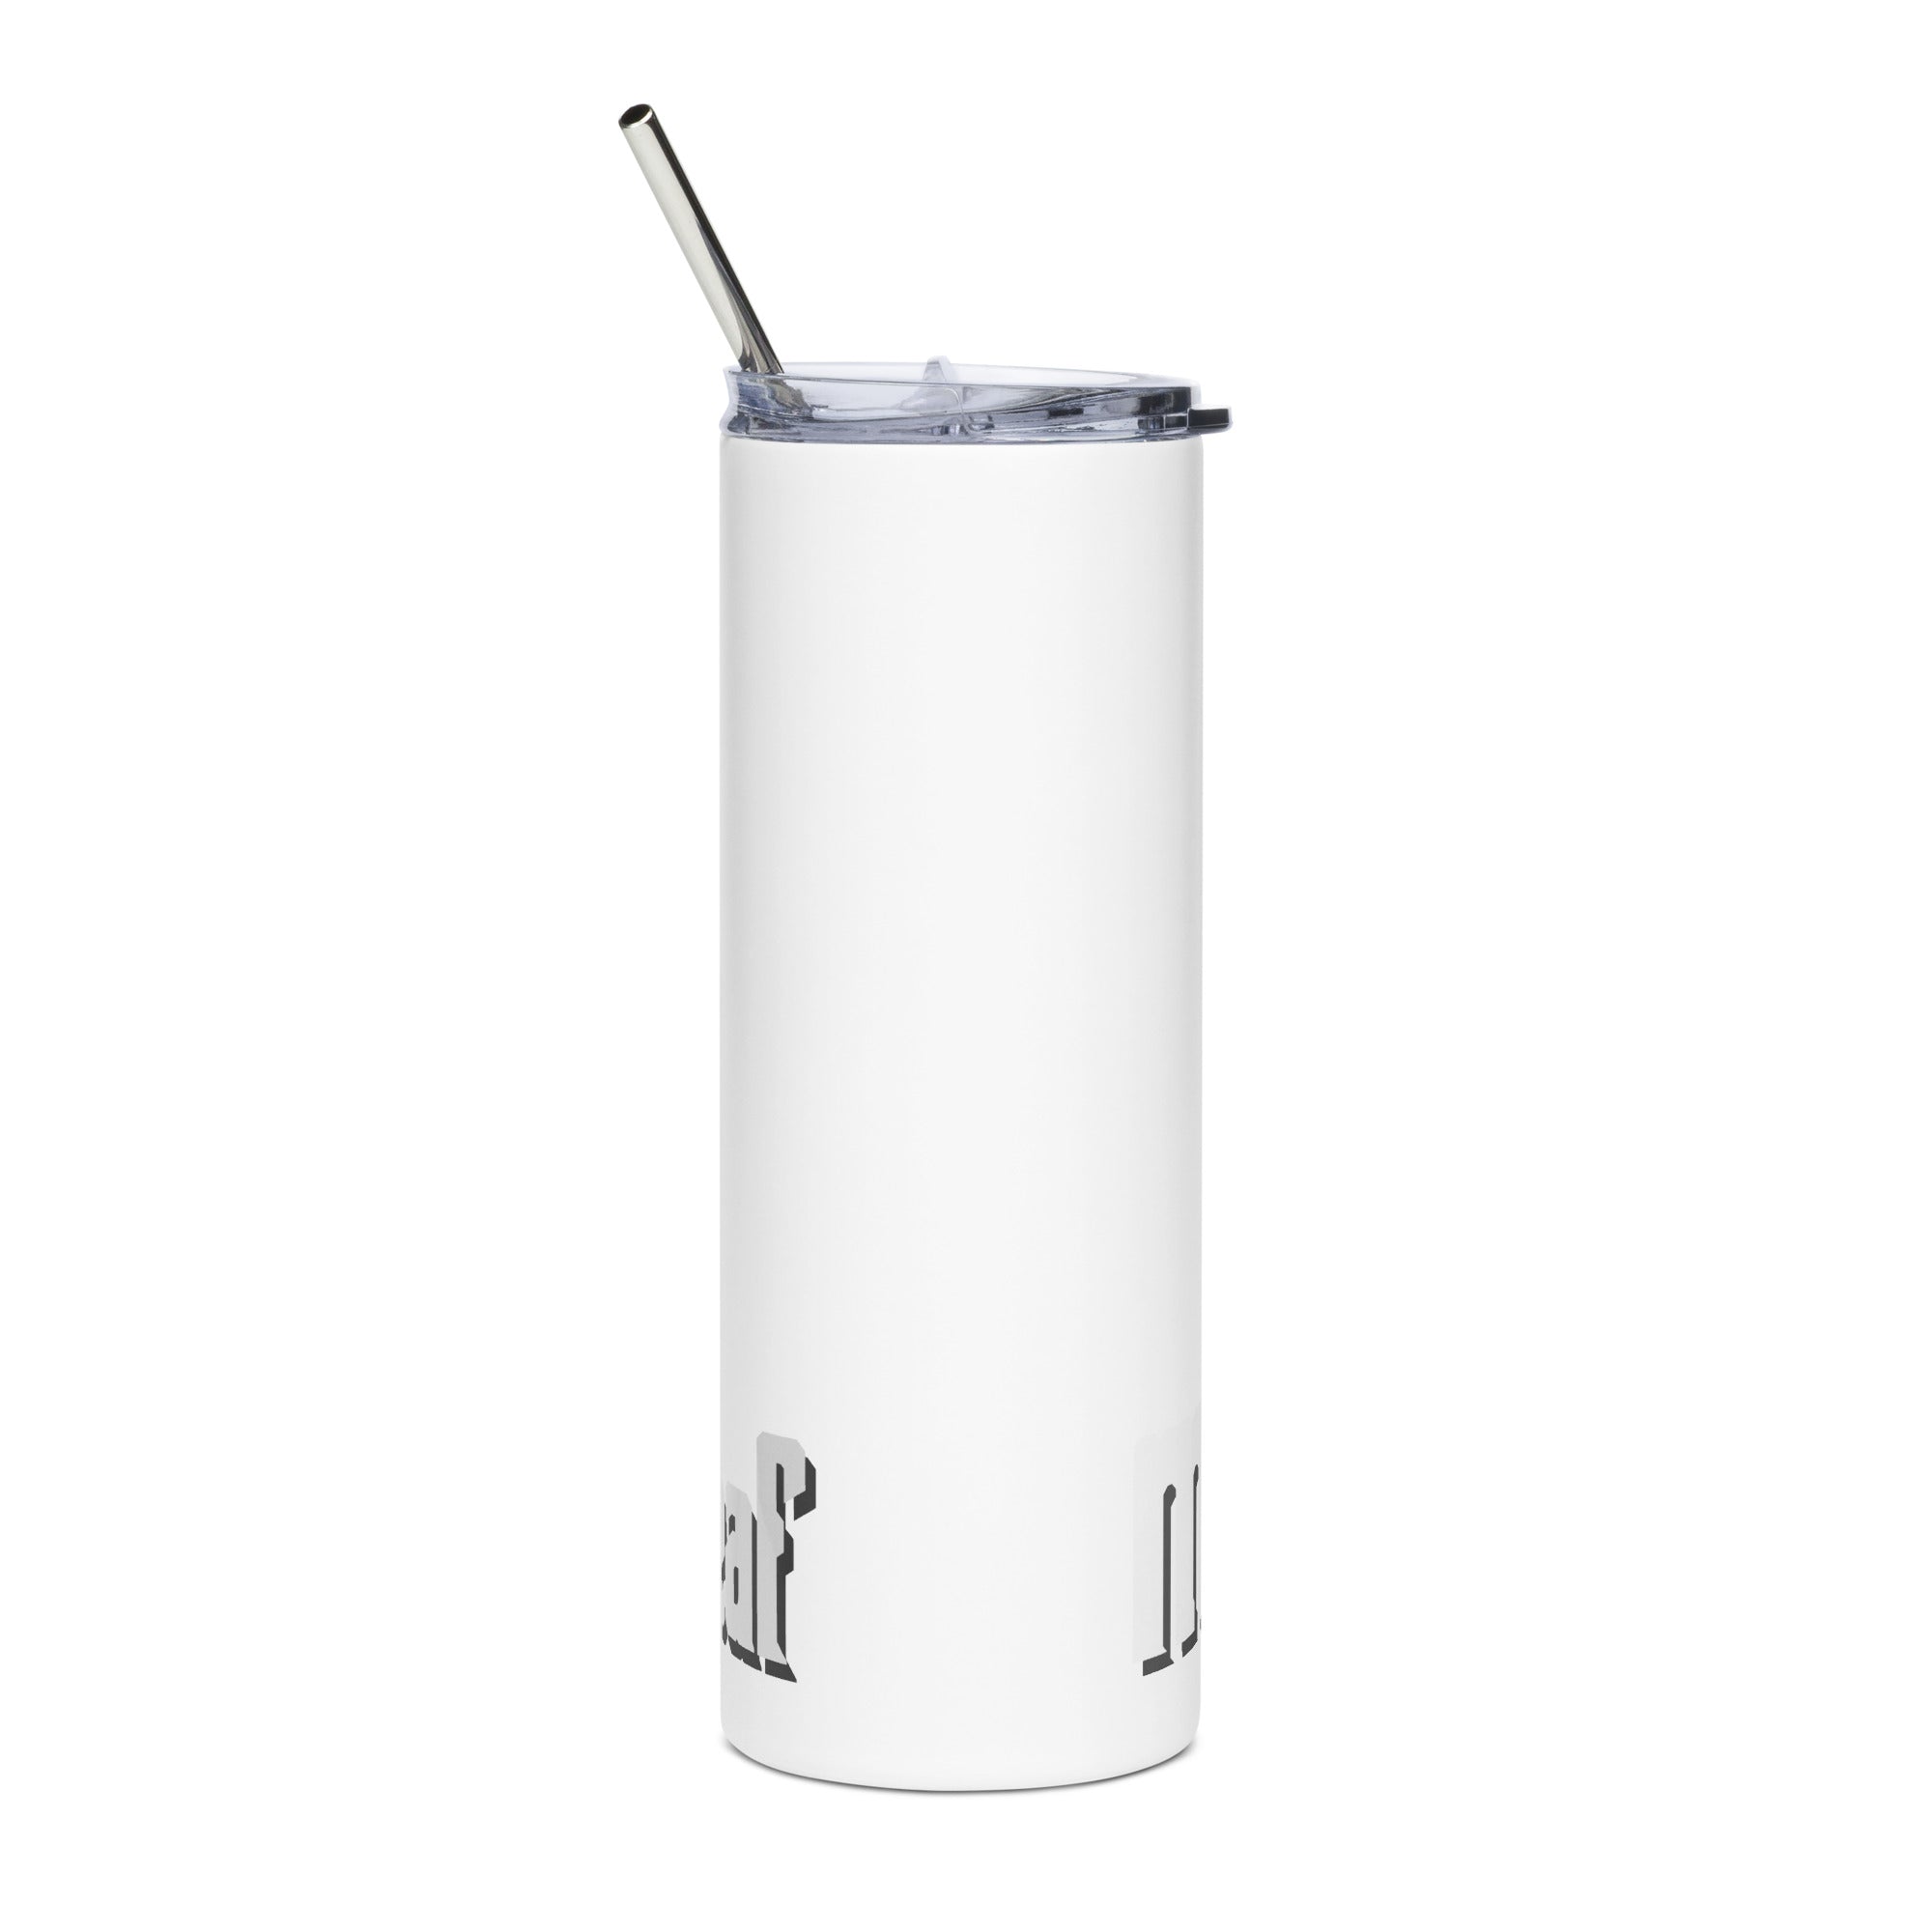 Men of the Leaf- Stainless steel tumbler